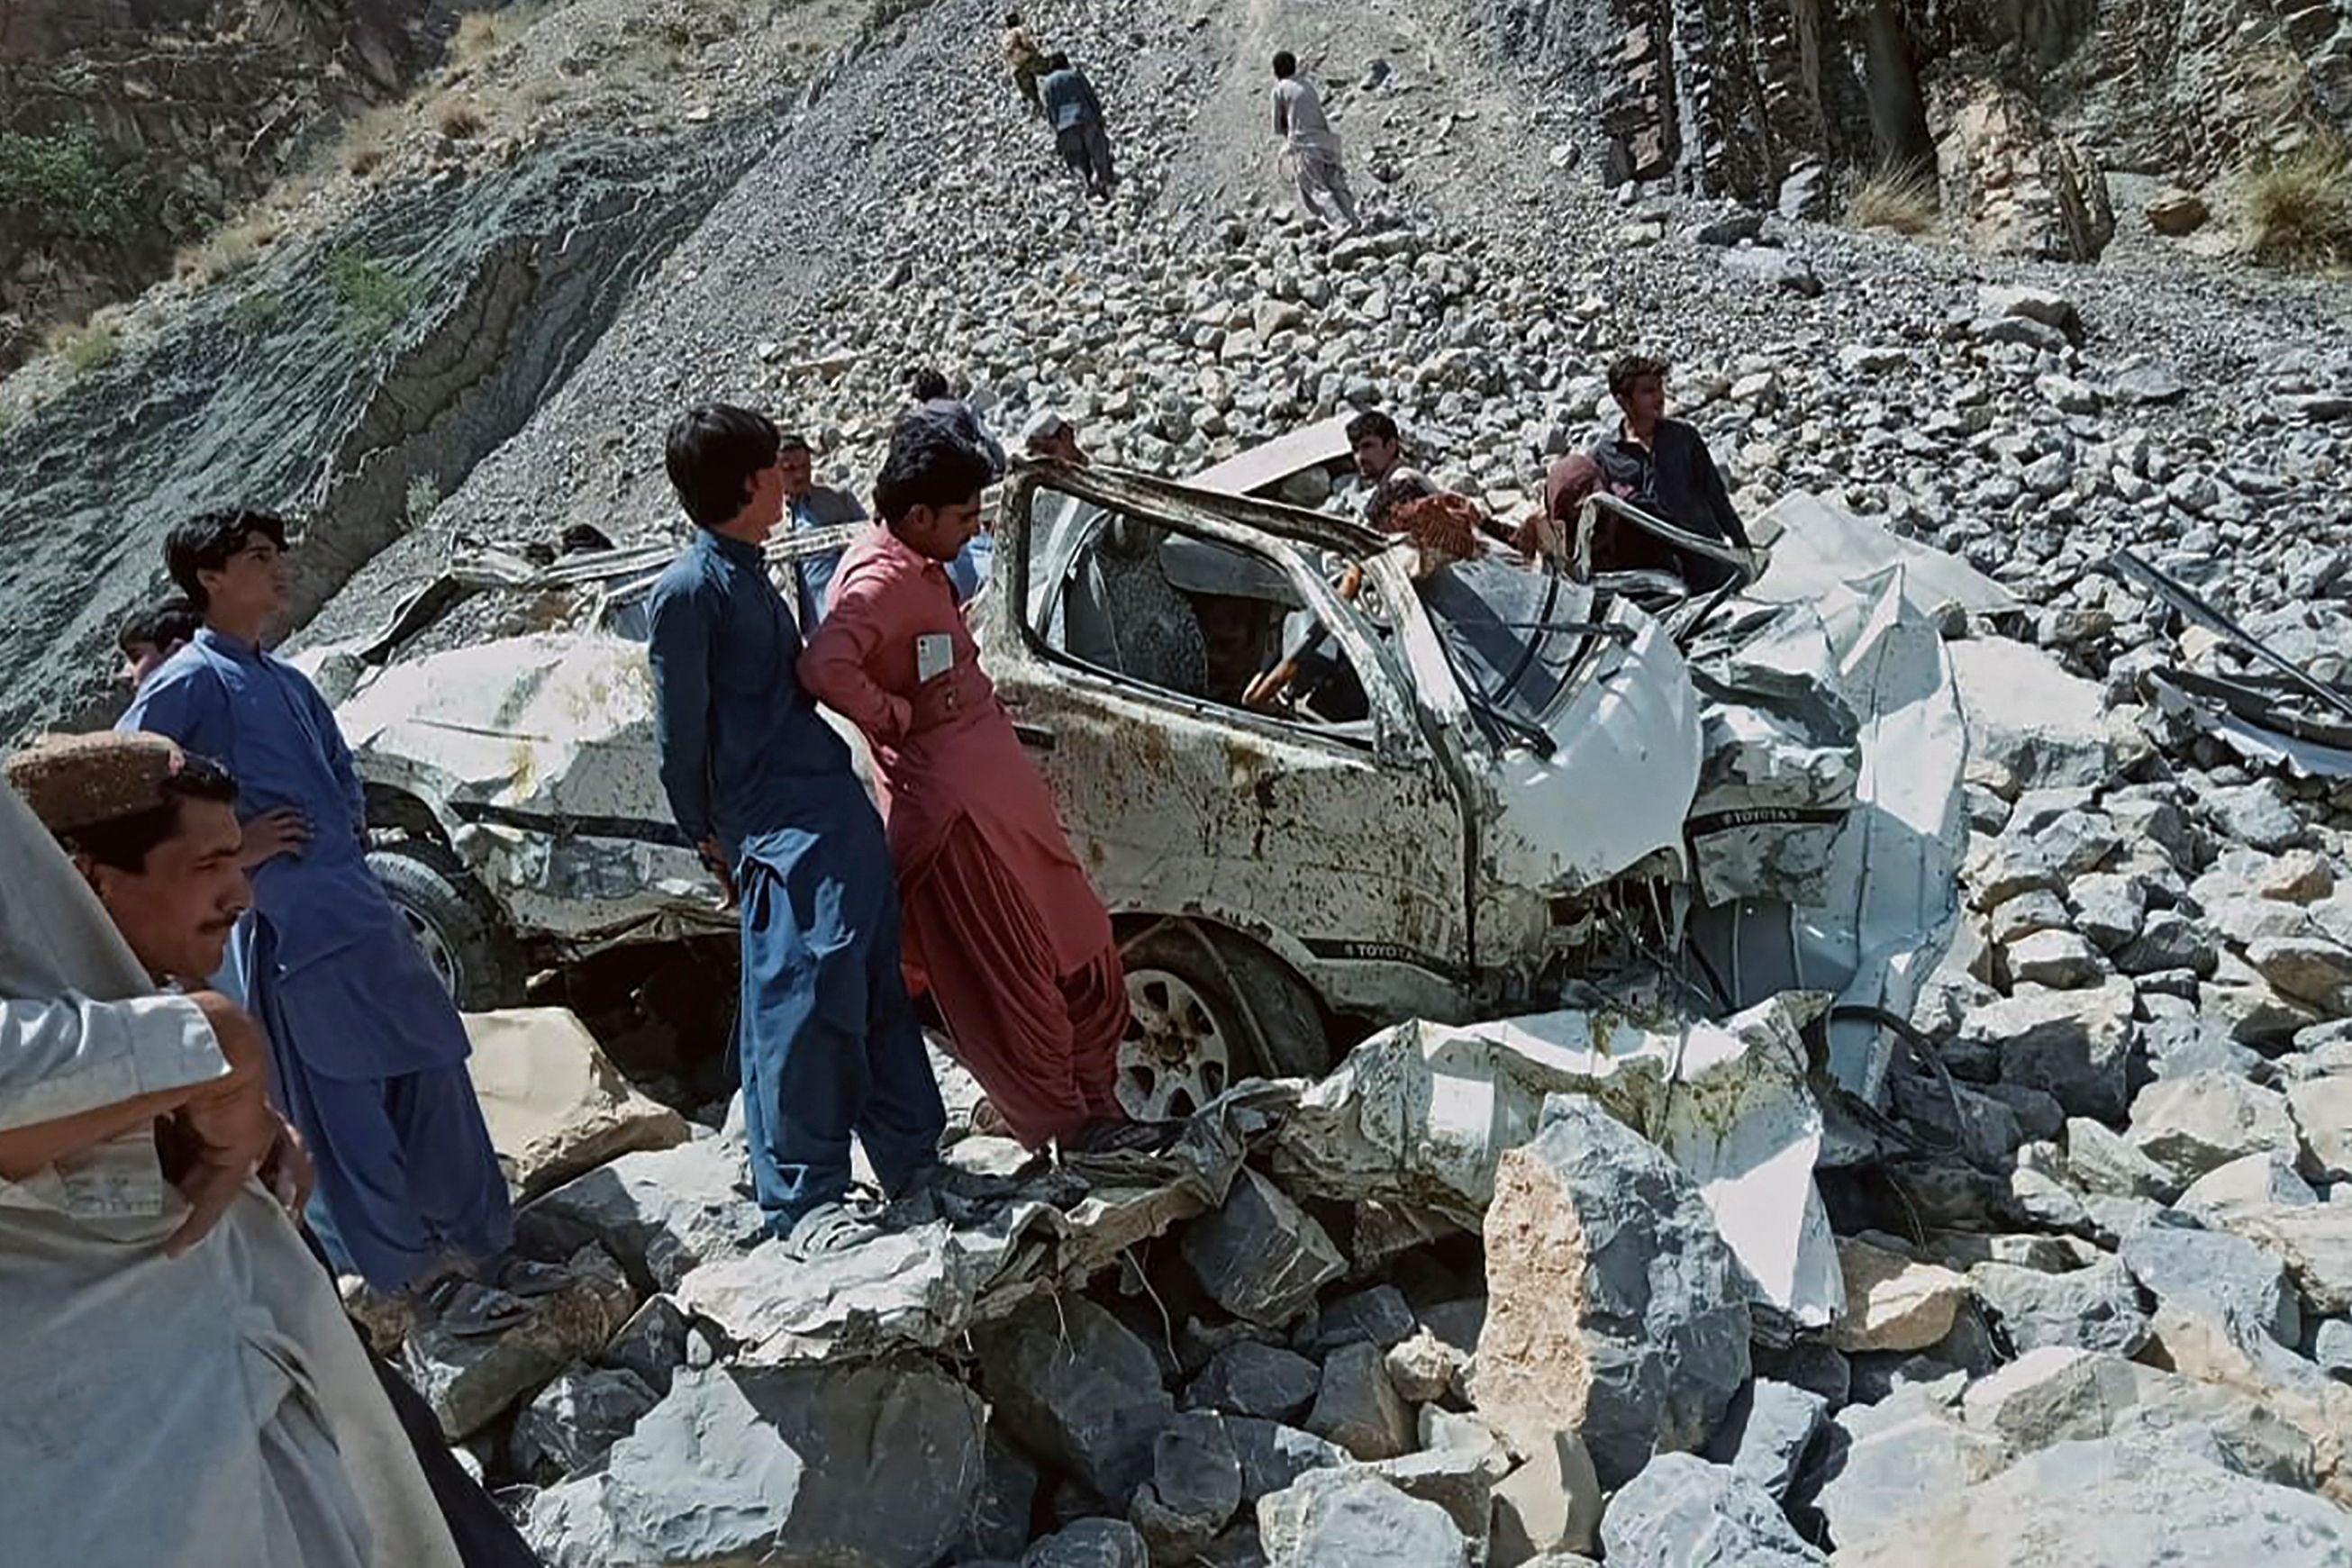 Onlookers gather around the wreckage of a passenger vehicle that plunged into a deep ravine in Qila Saifullah district of Balochistan province on 8 June 2022